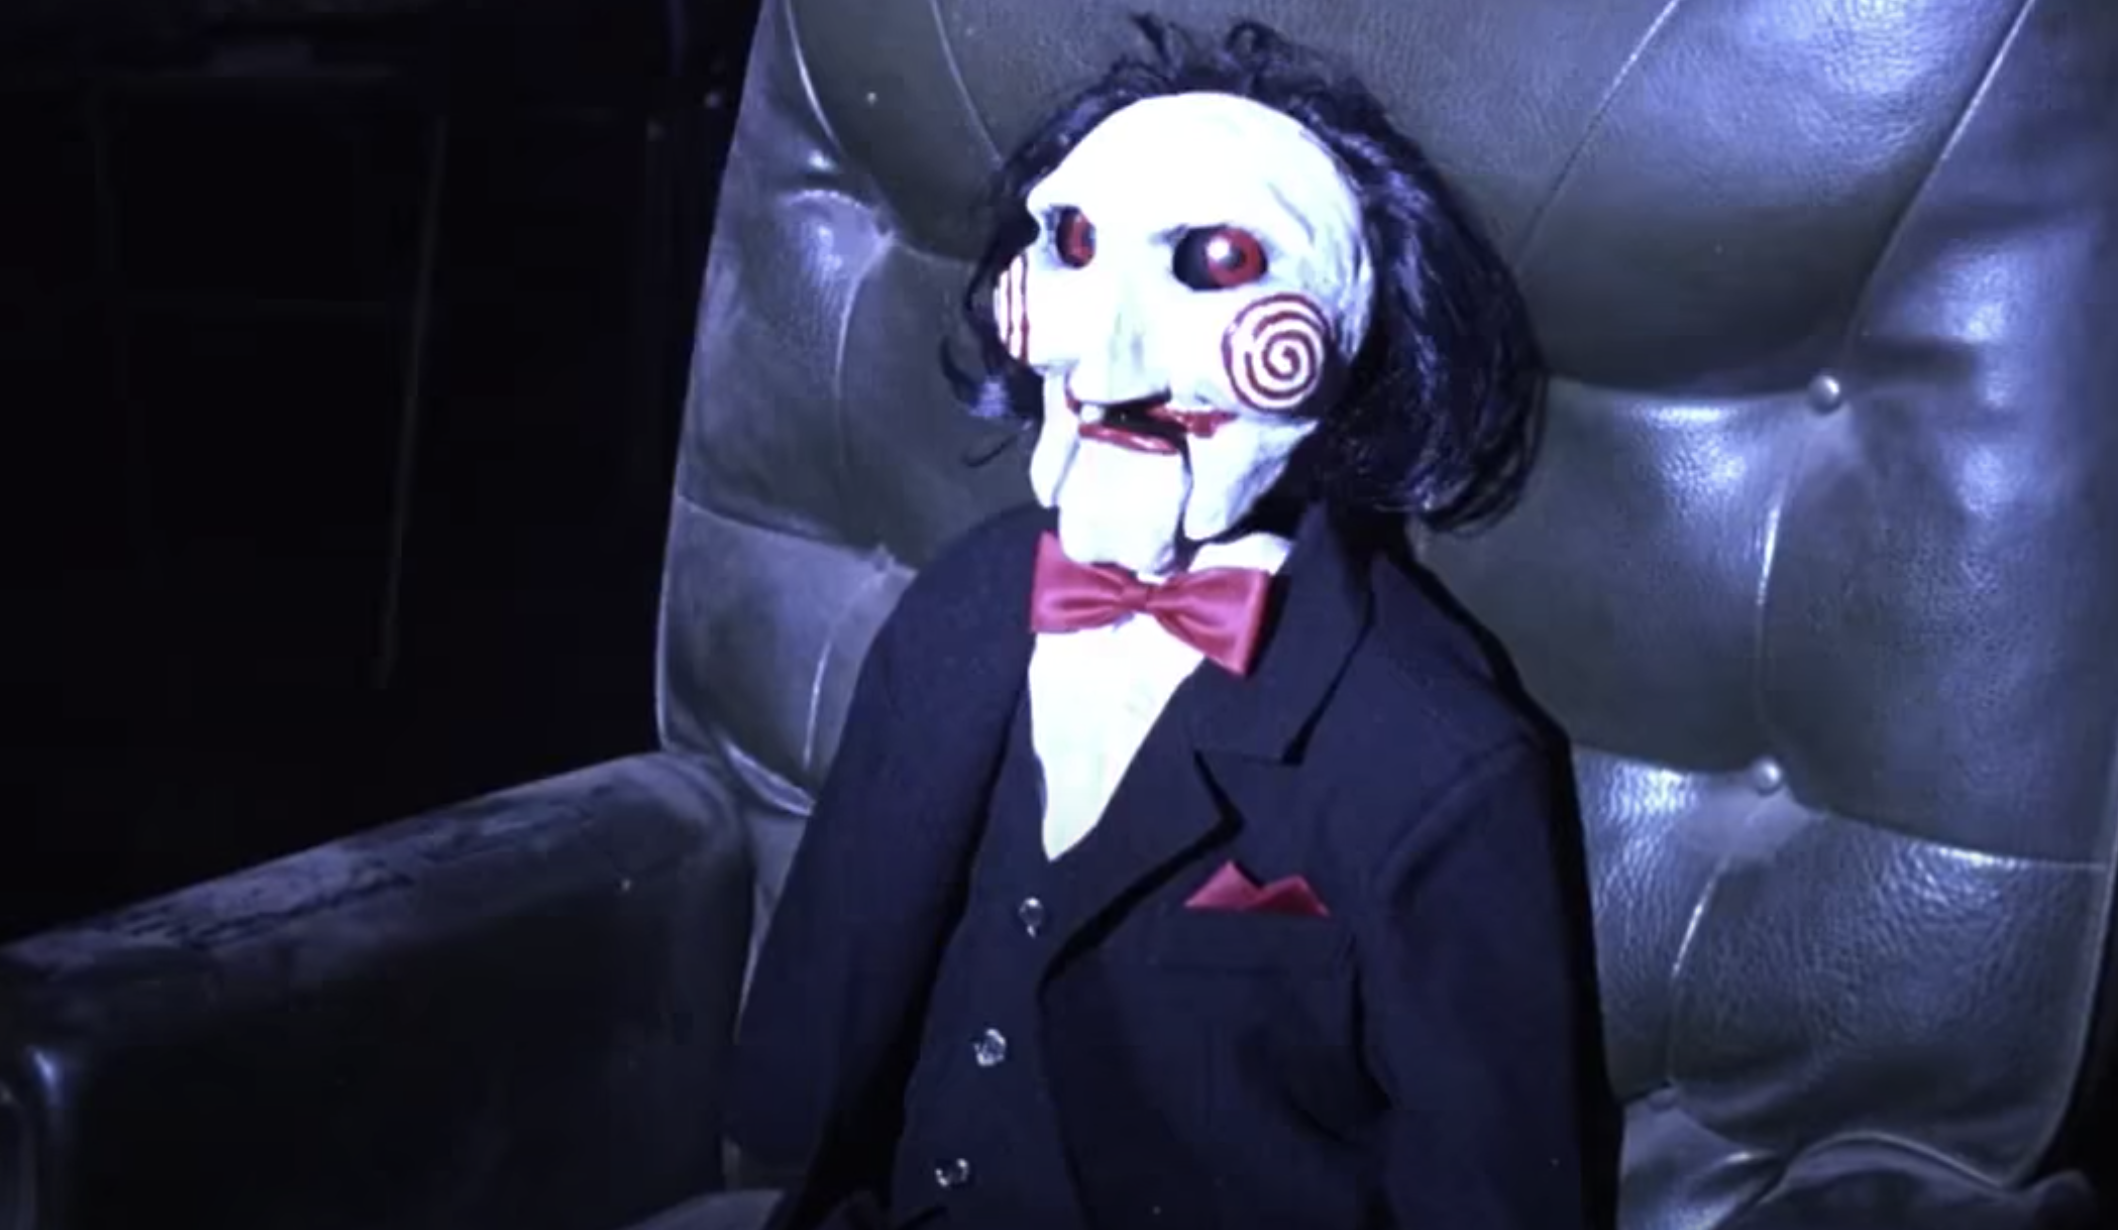 A scary doll with a white face, black hair, and red eyes sits in a chair